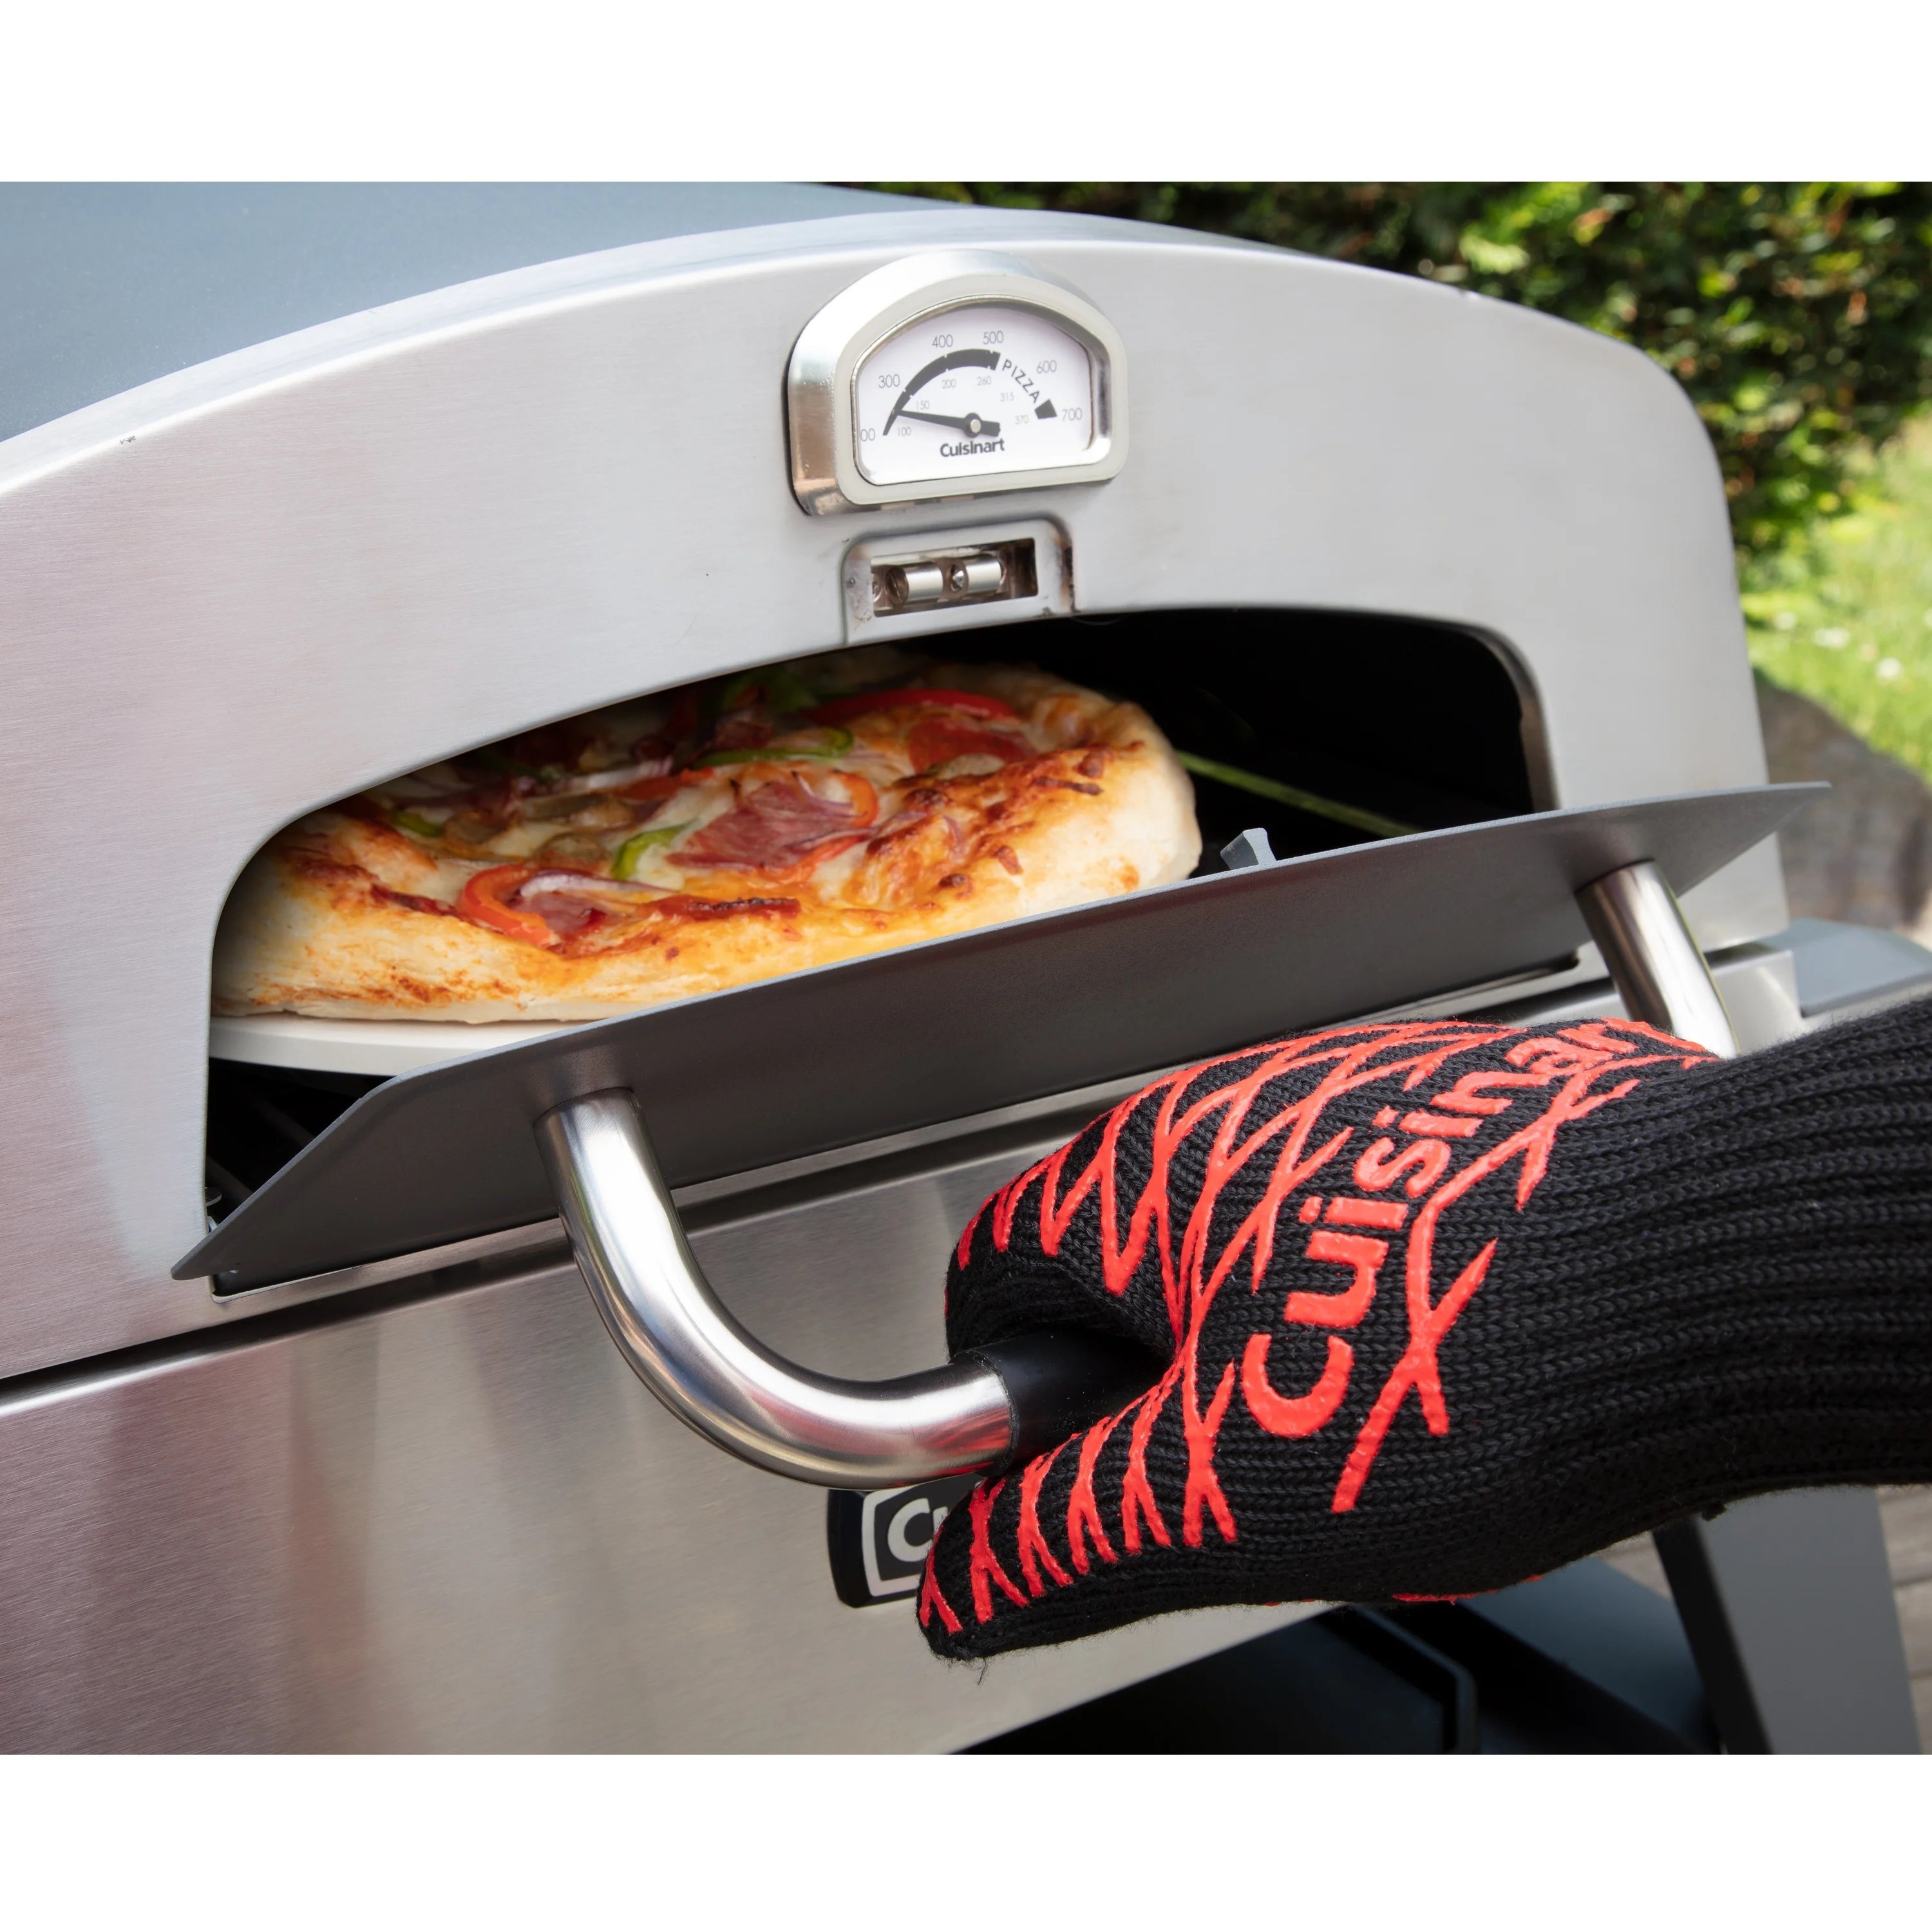 Grilled Personal Pizza Maker, Barbecue